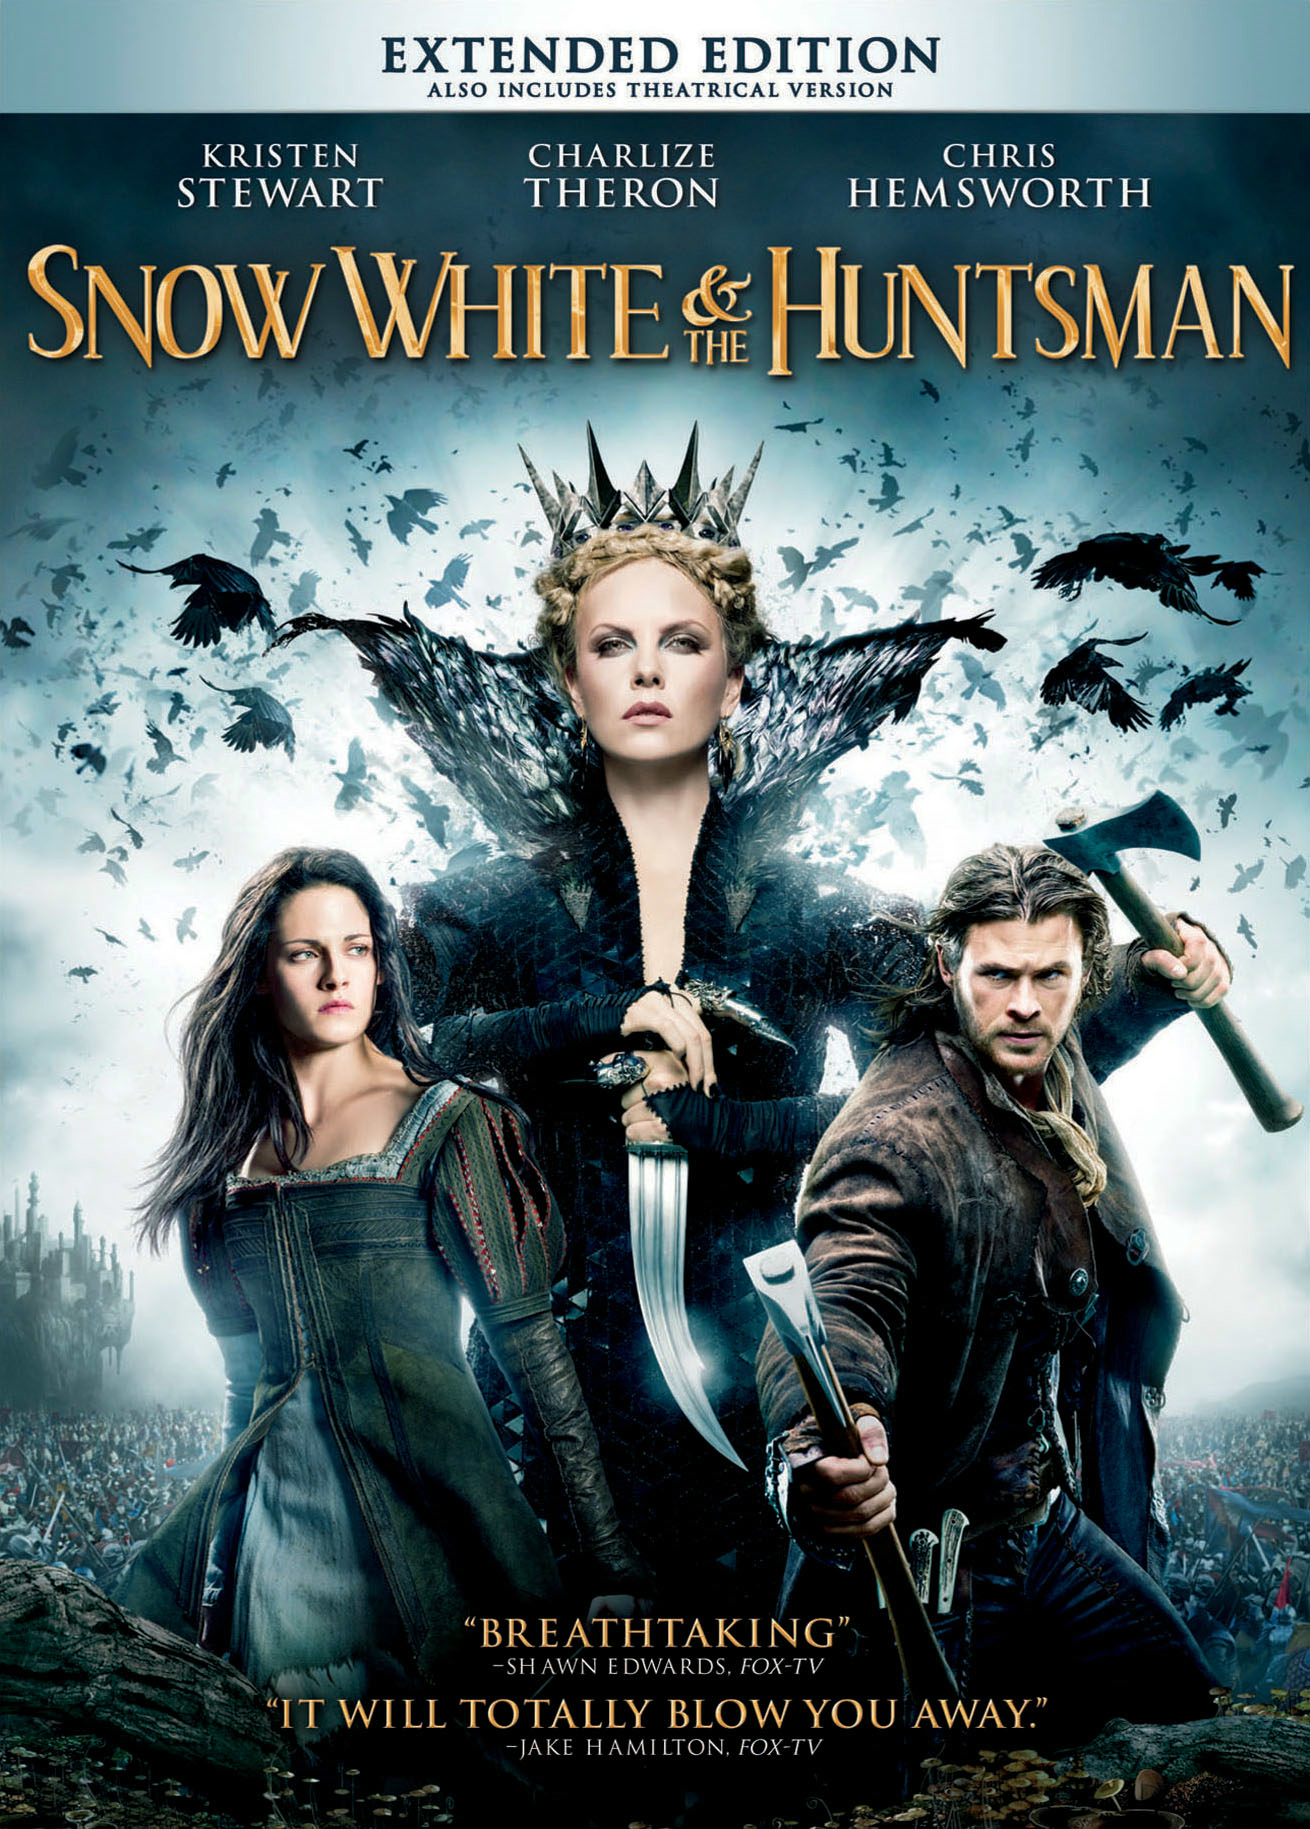 Snow White And The Huntsman (Extended Edition) - DVD [ 2012 ]  - Adventure Movies On DVD - Movies On GRUV